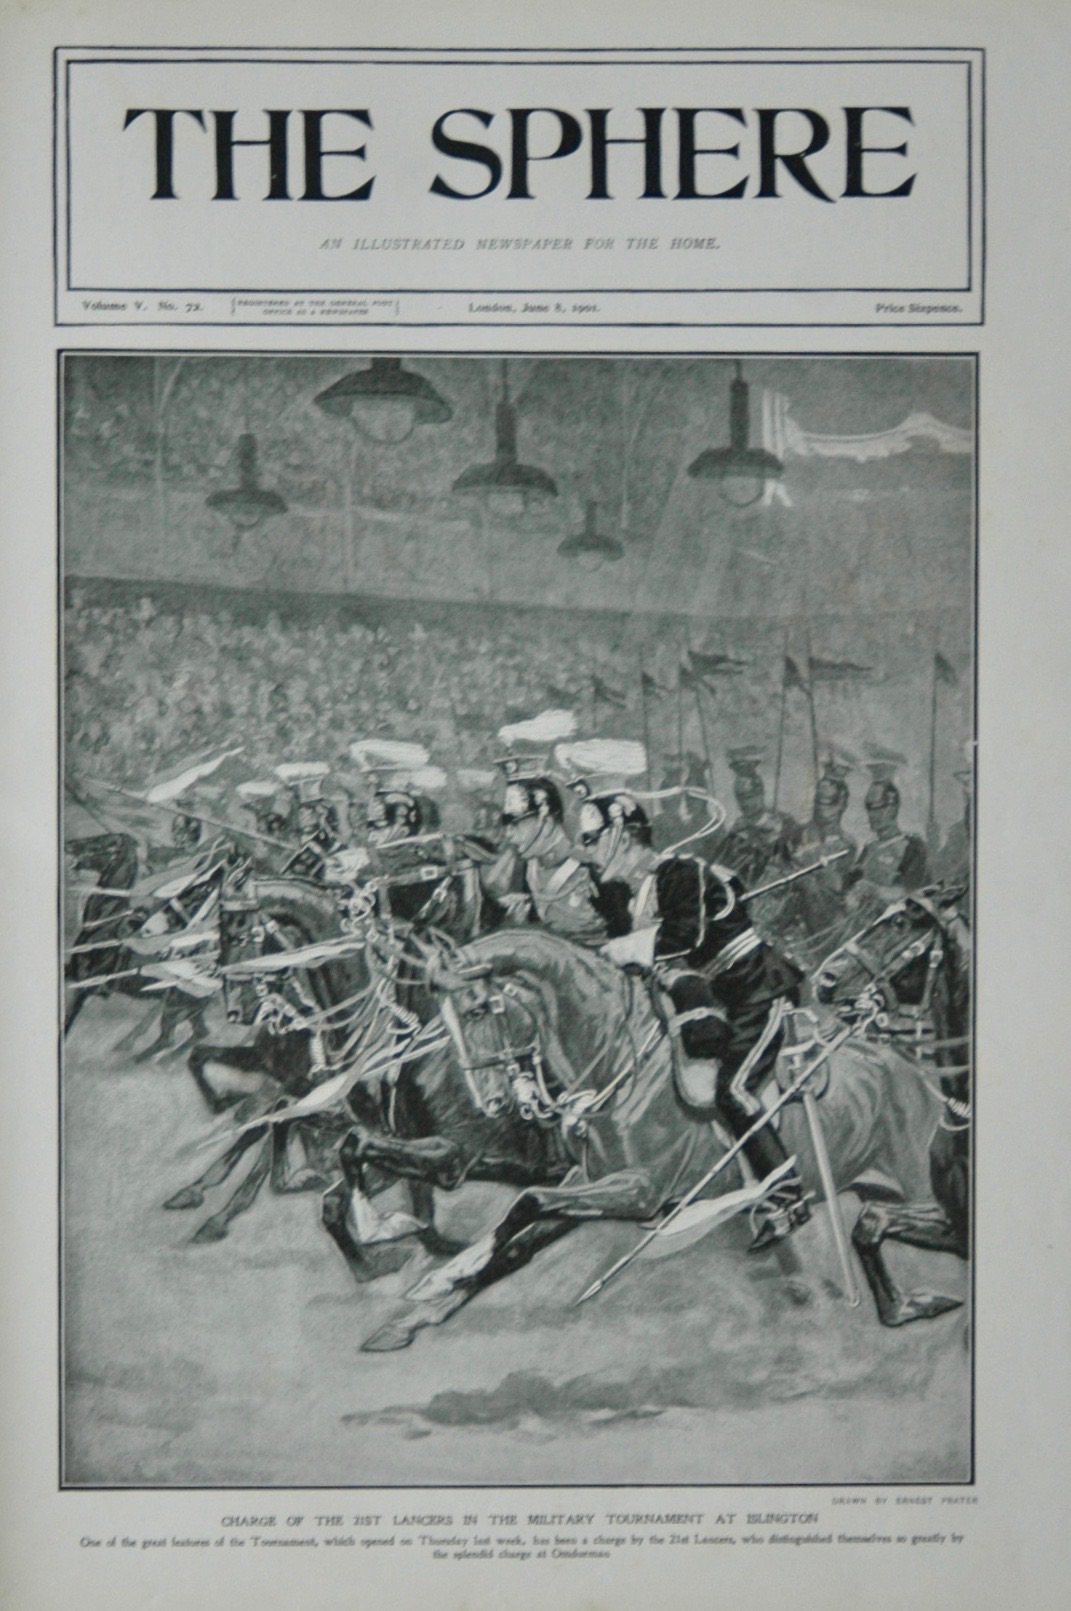 Charge of the 21st Lancers - Military Tournament - 1901